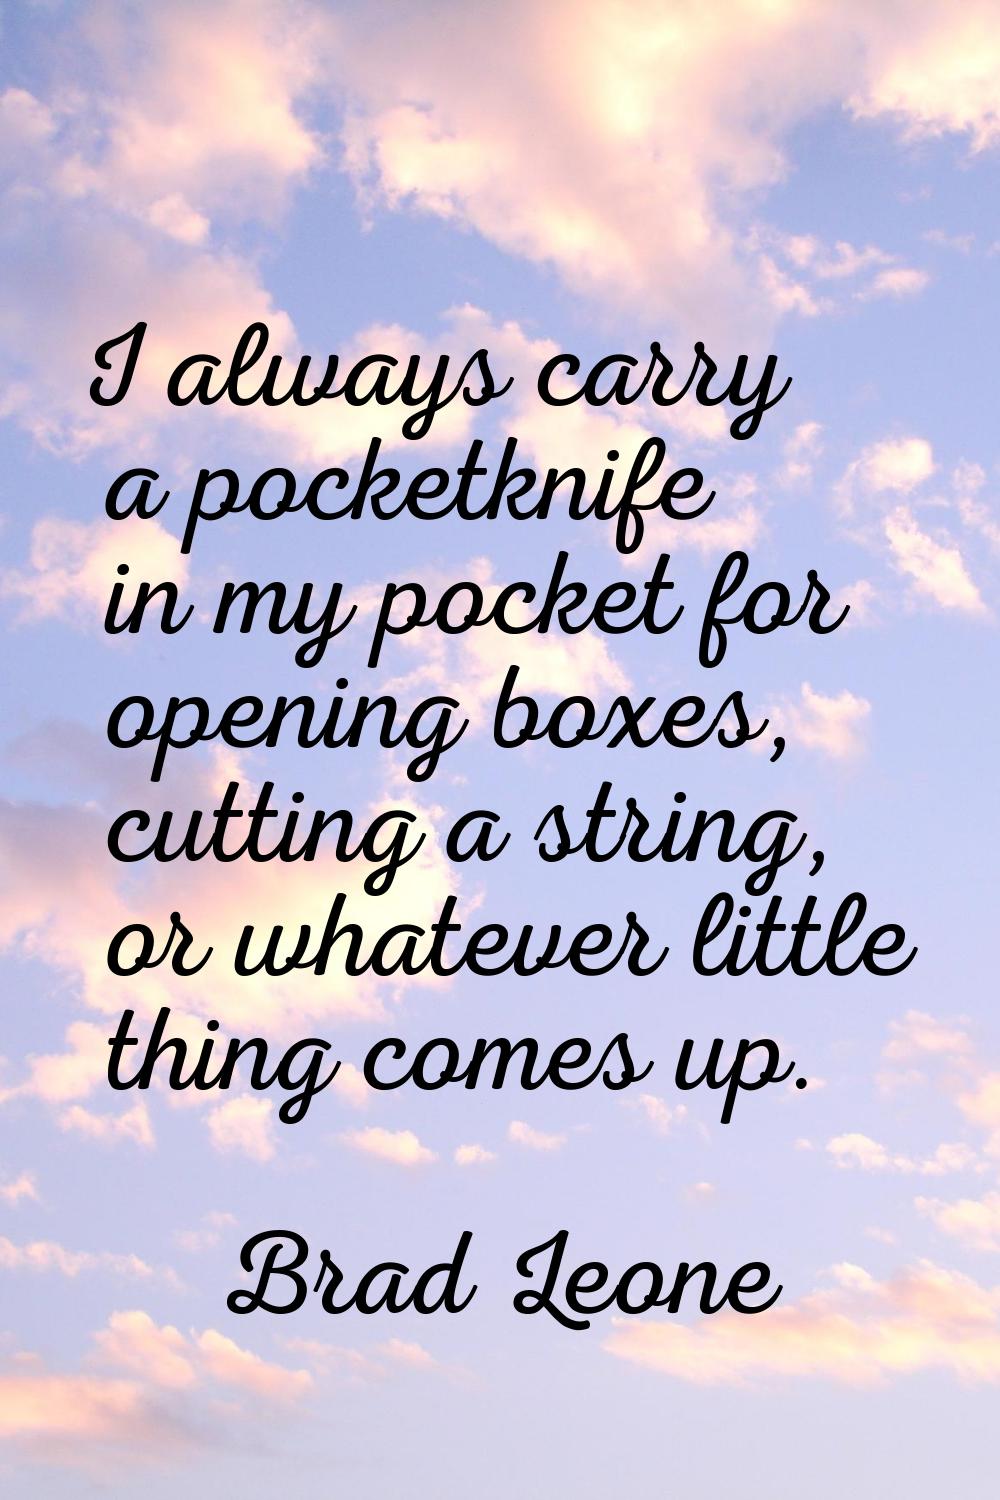 I always carry a pocketknife in my pocket for opening boxes, cutting a string, or whatever little t